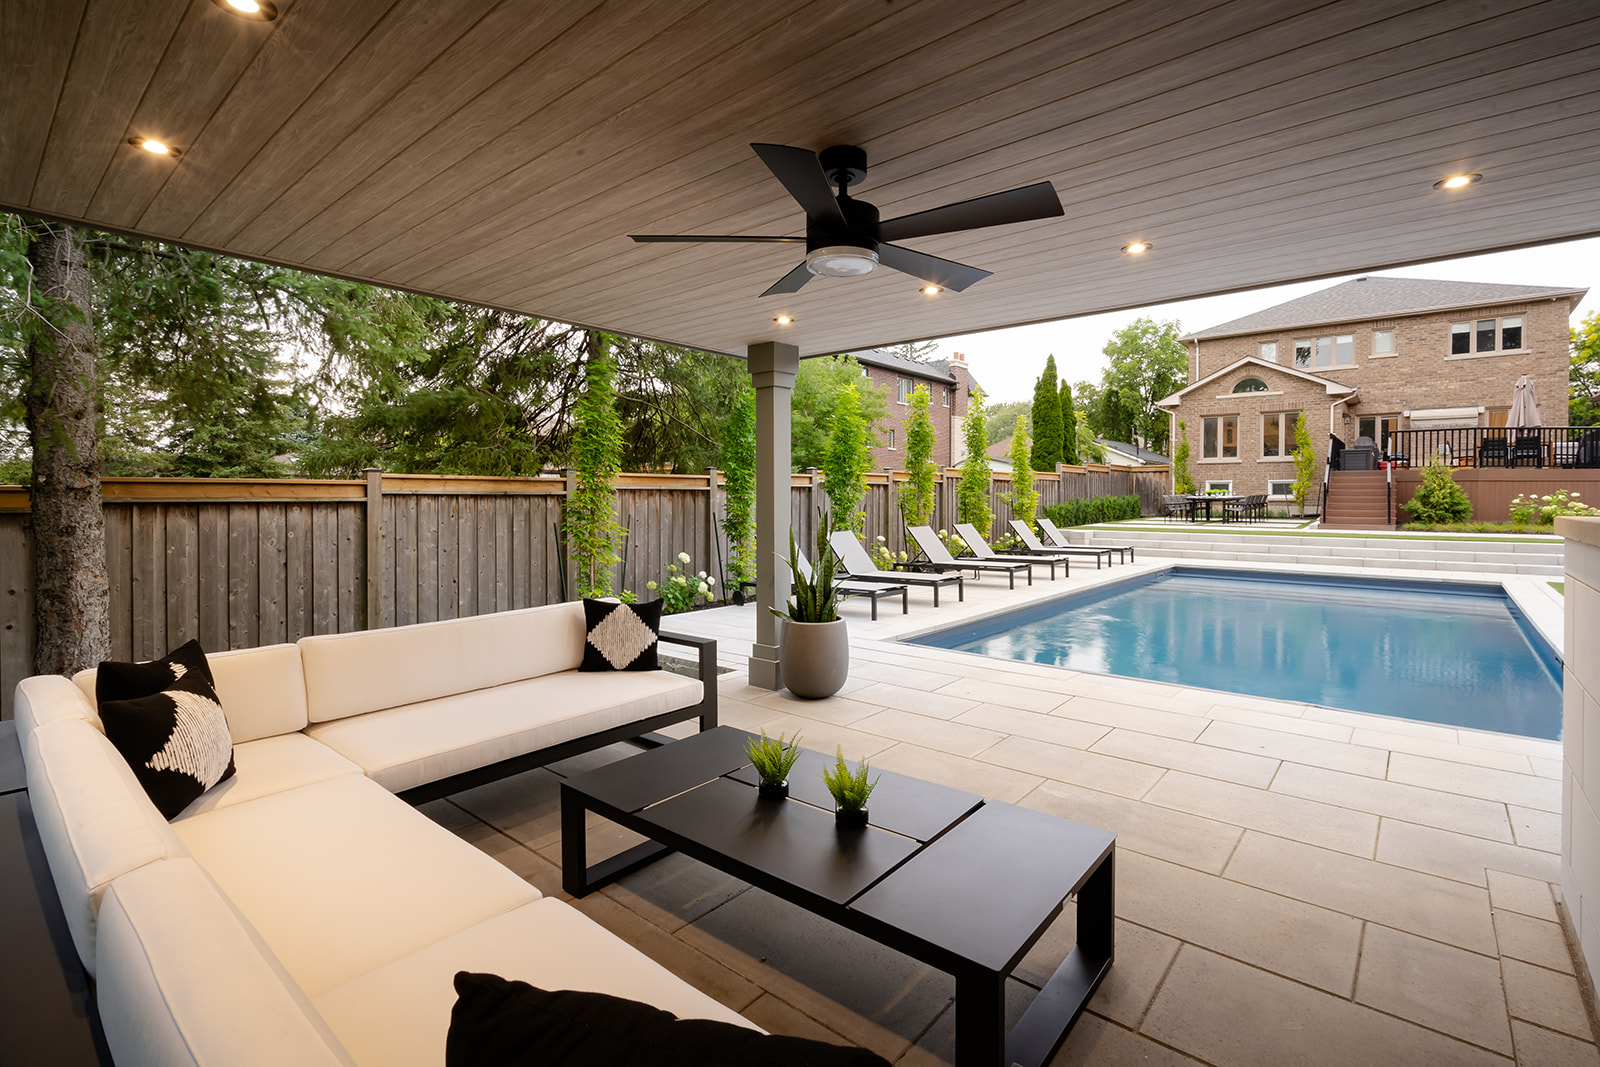 A seating area underneath an awning and a pool on the right.